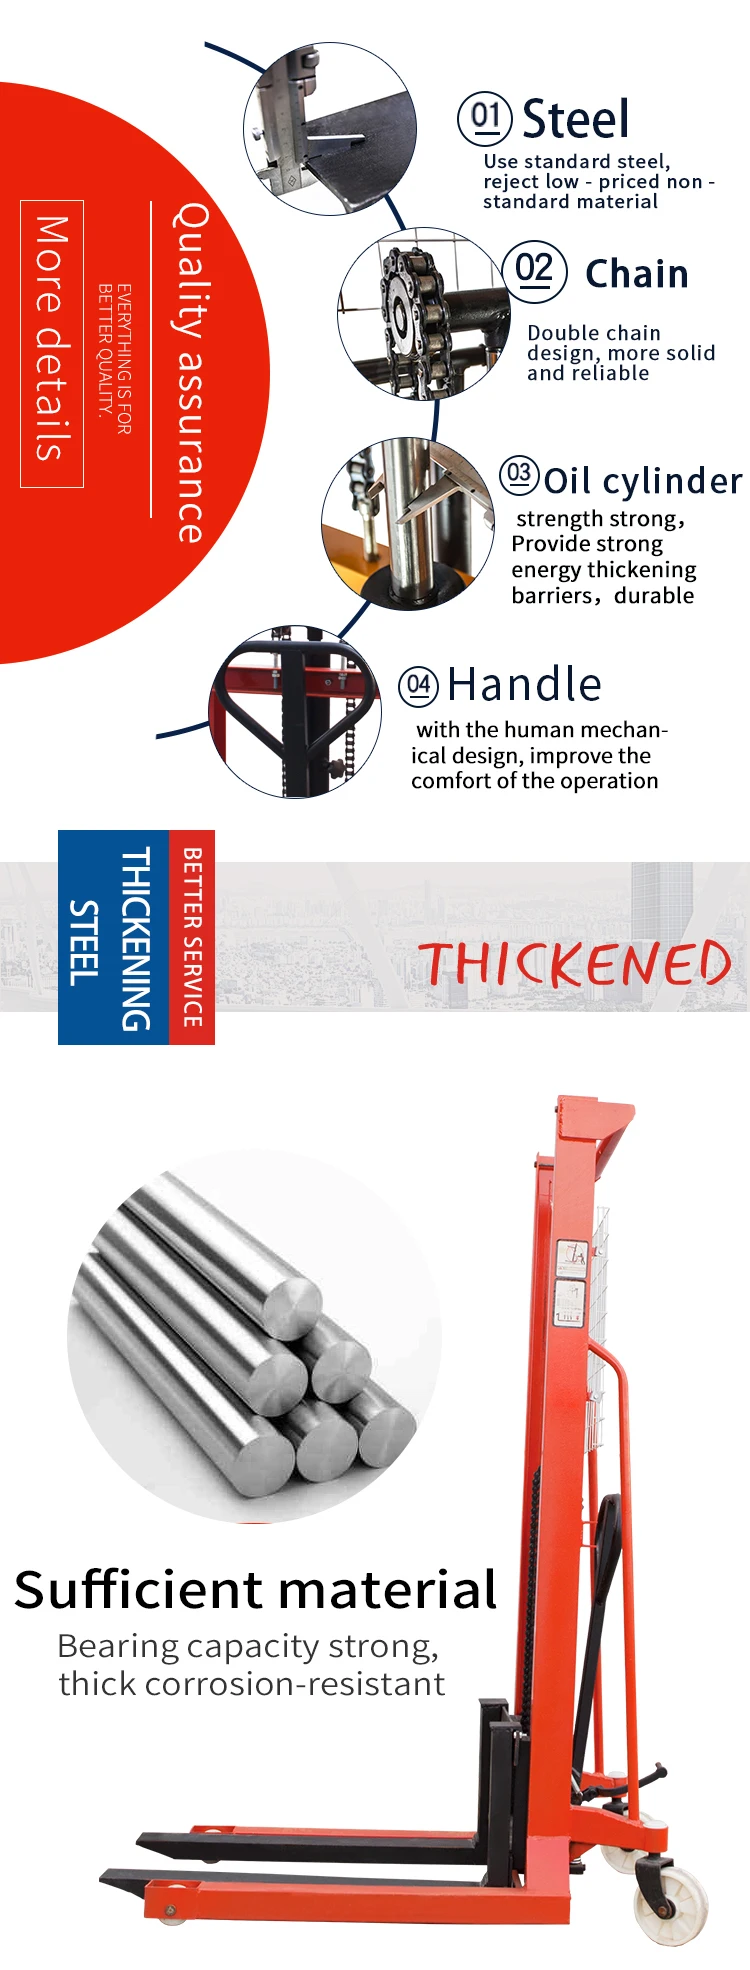 Capacity Hydraulic Hand Lift Manual Stacker with Adjustable Forks Lifting Height